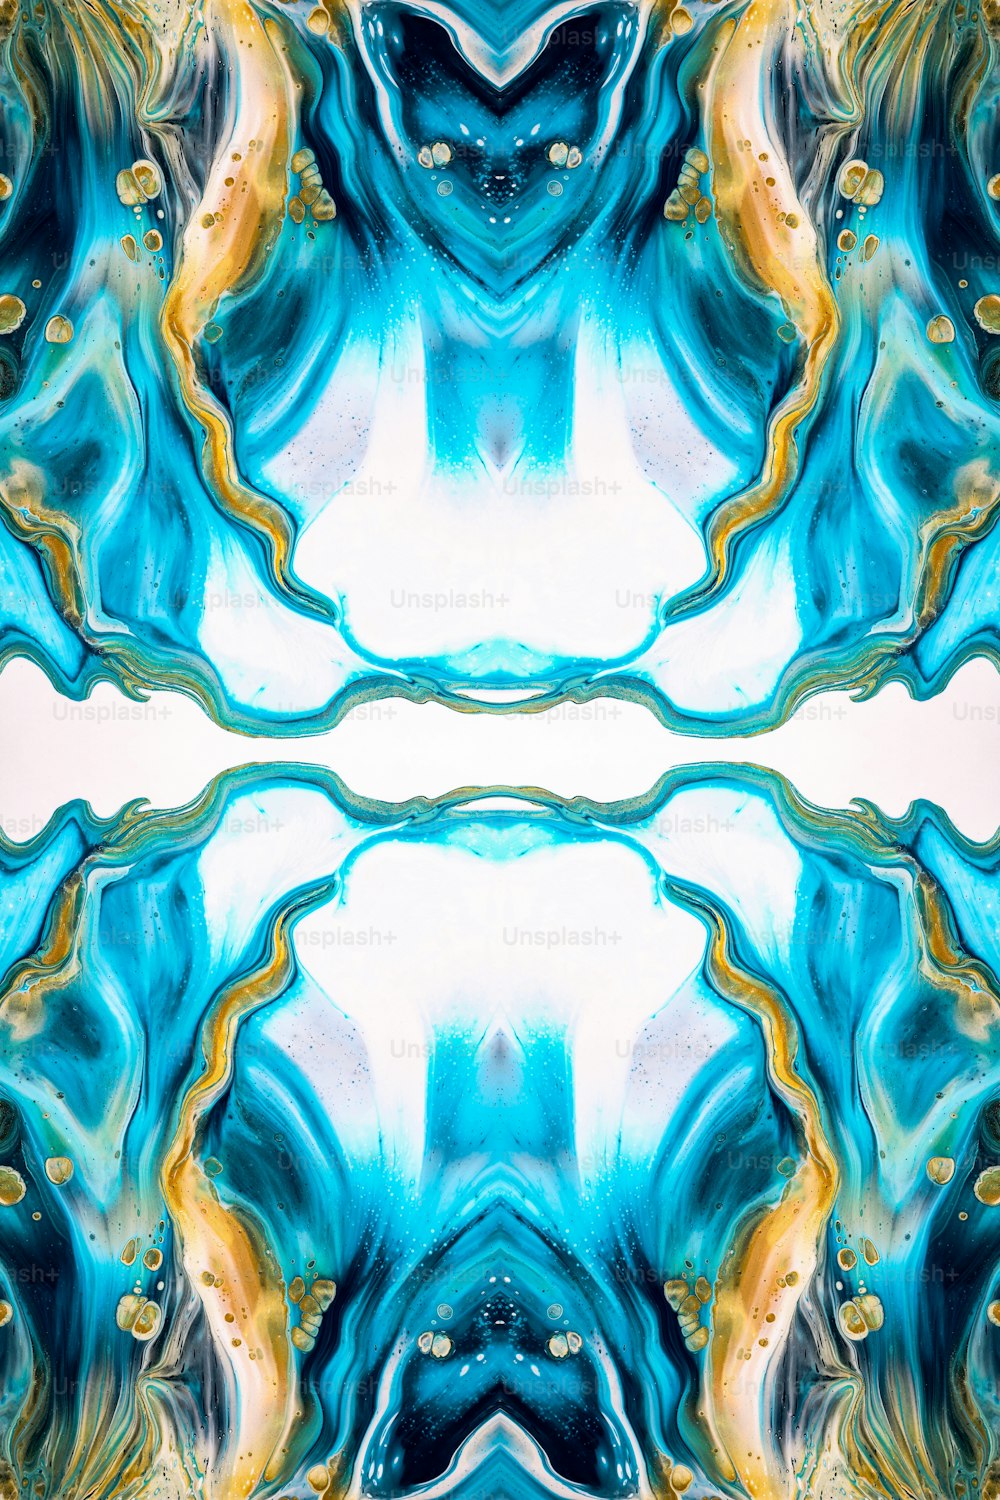 an abstract image of blue and yellow colors